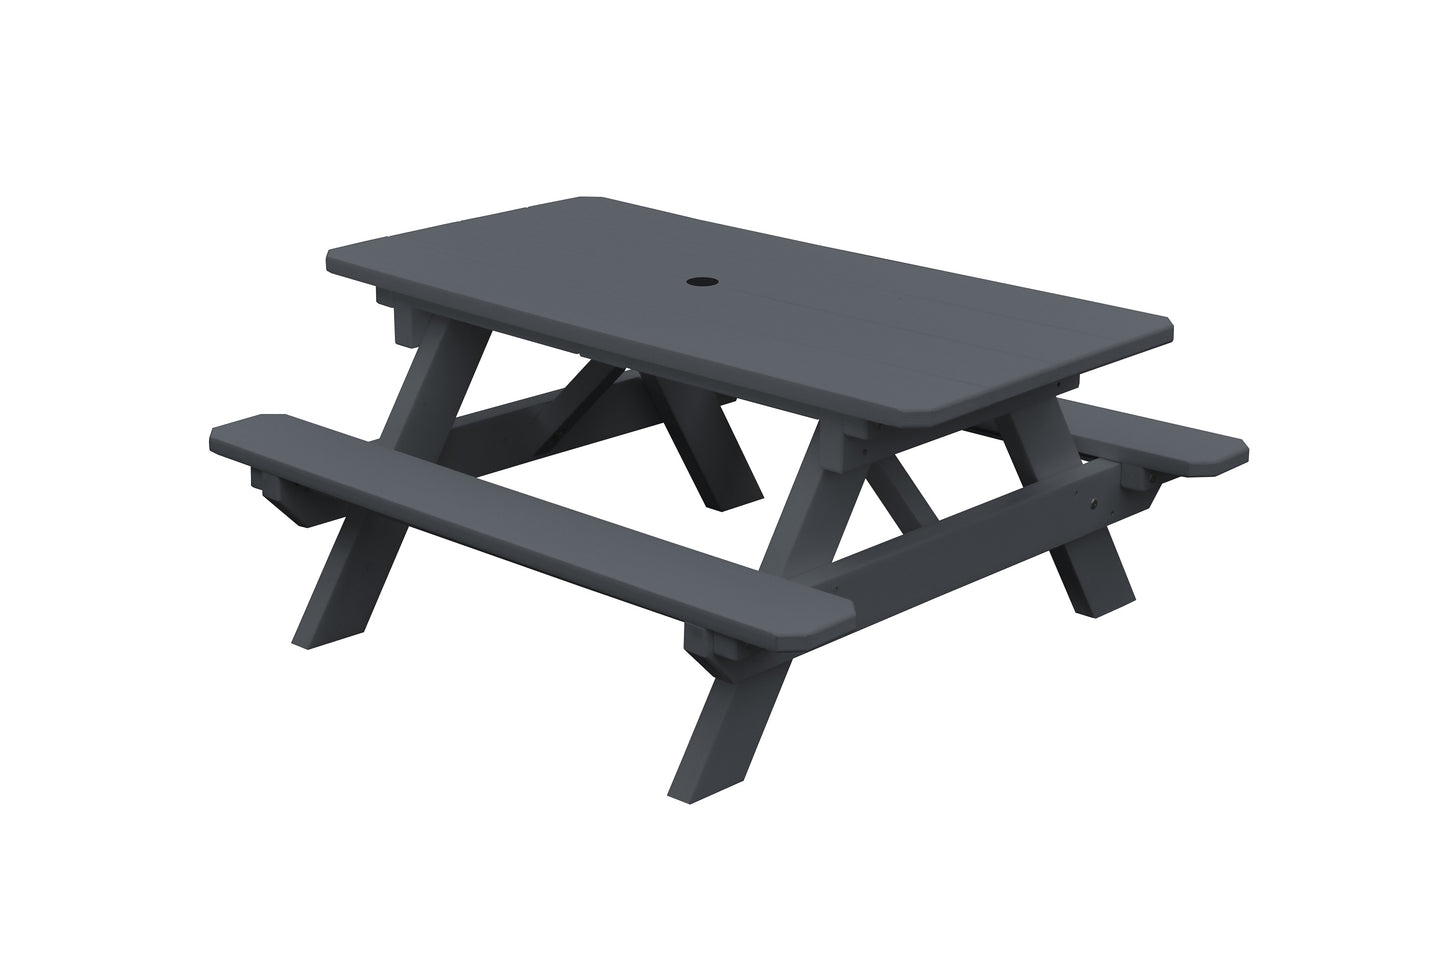 A&L Furniture Co. Recycled Plastic Kids Picnic Table - Specify for FREE 2" Umbrella Hole  - LEAD TIME TO SHIP 10 BUSINESS DAYS